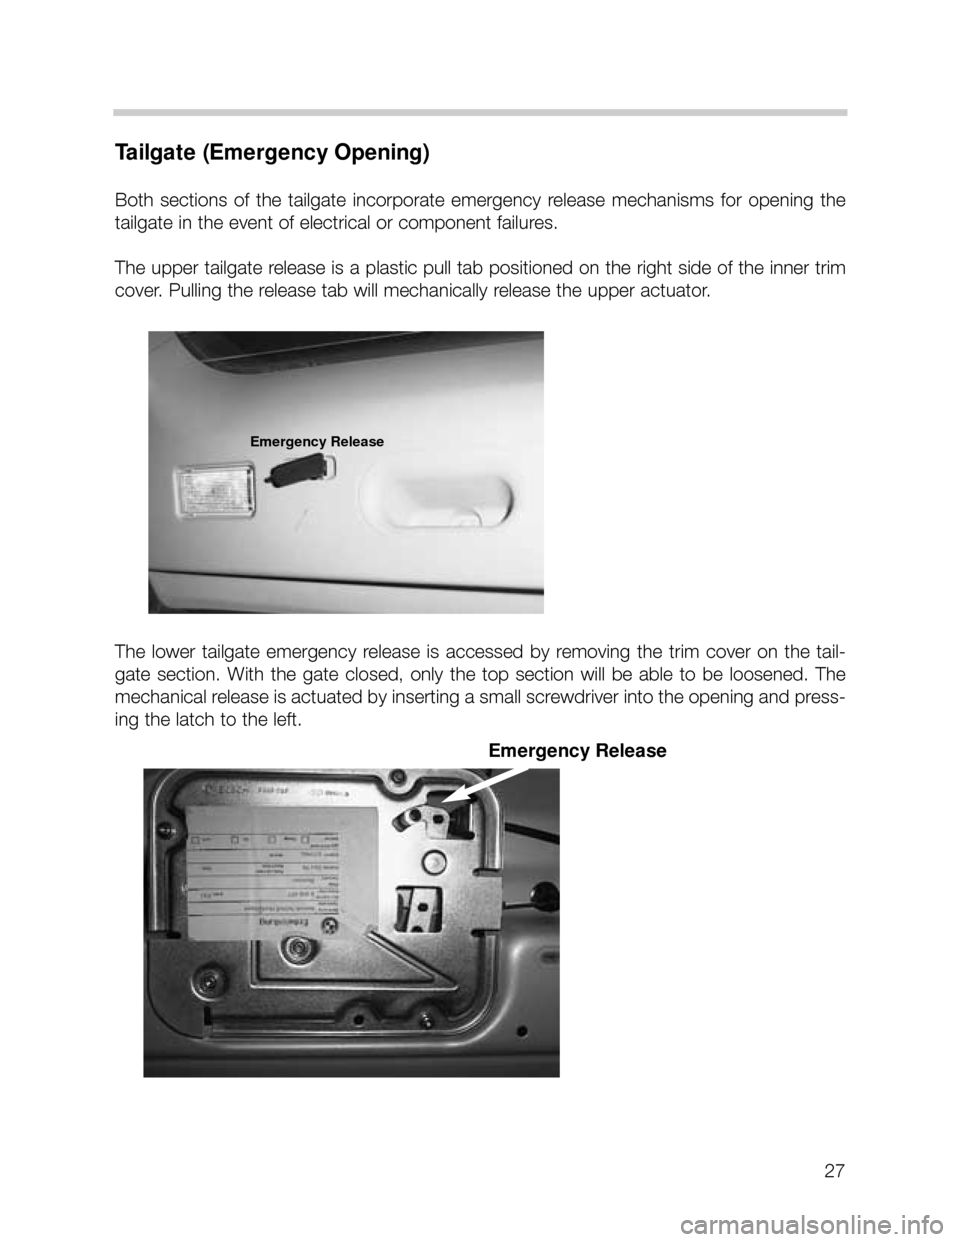 BMW X5 2004 E53 Owners Manual 27
Tailgate (Emergency Opening)
Both  sections  of  the  tailgate  incorporate  emergency  release  mechanisms  for  opening  the
tailgate in the event of electrical or component failures. 
The upper 